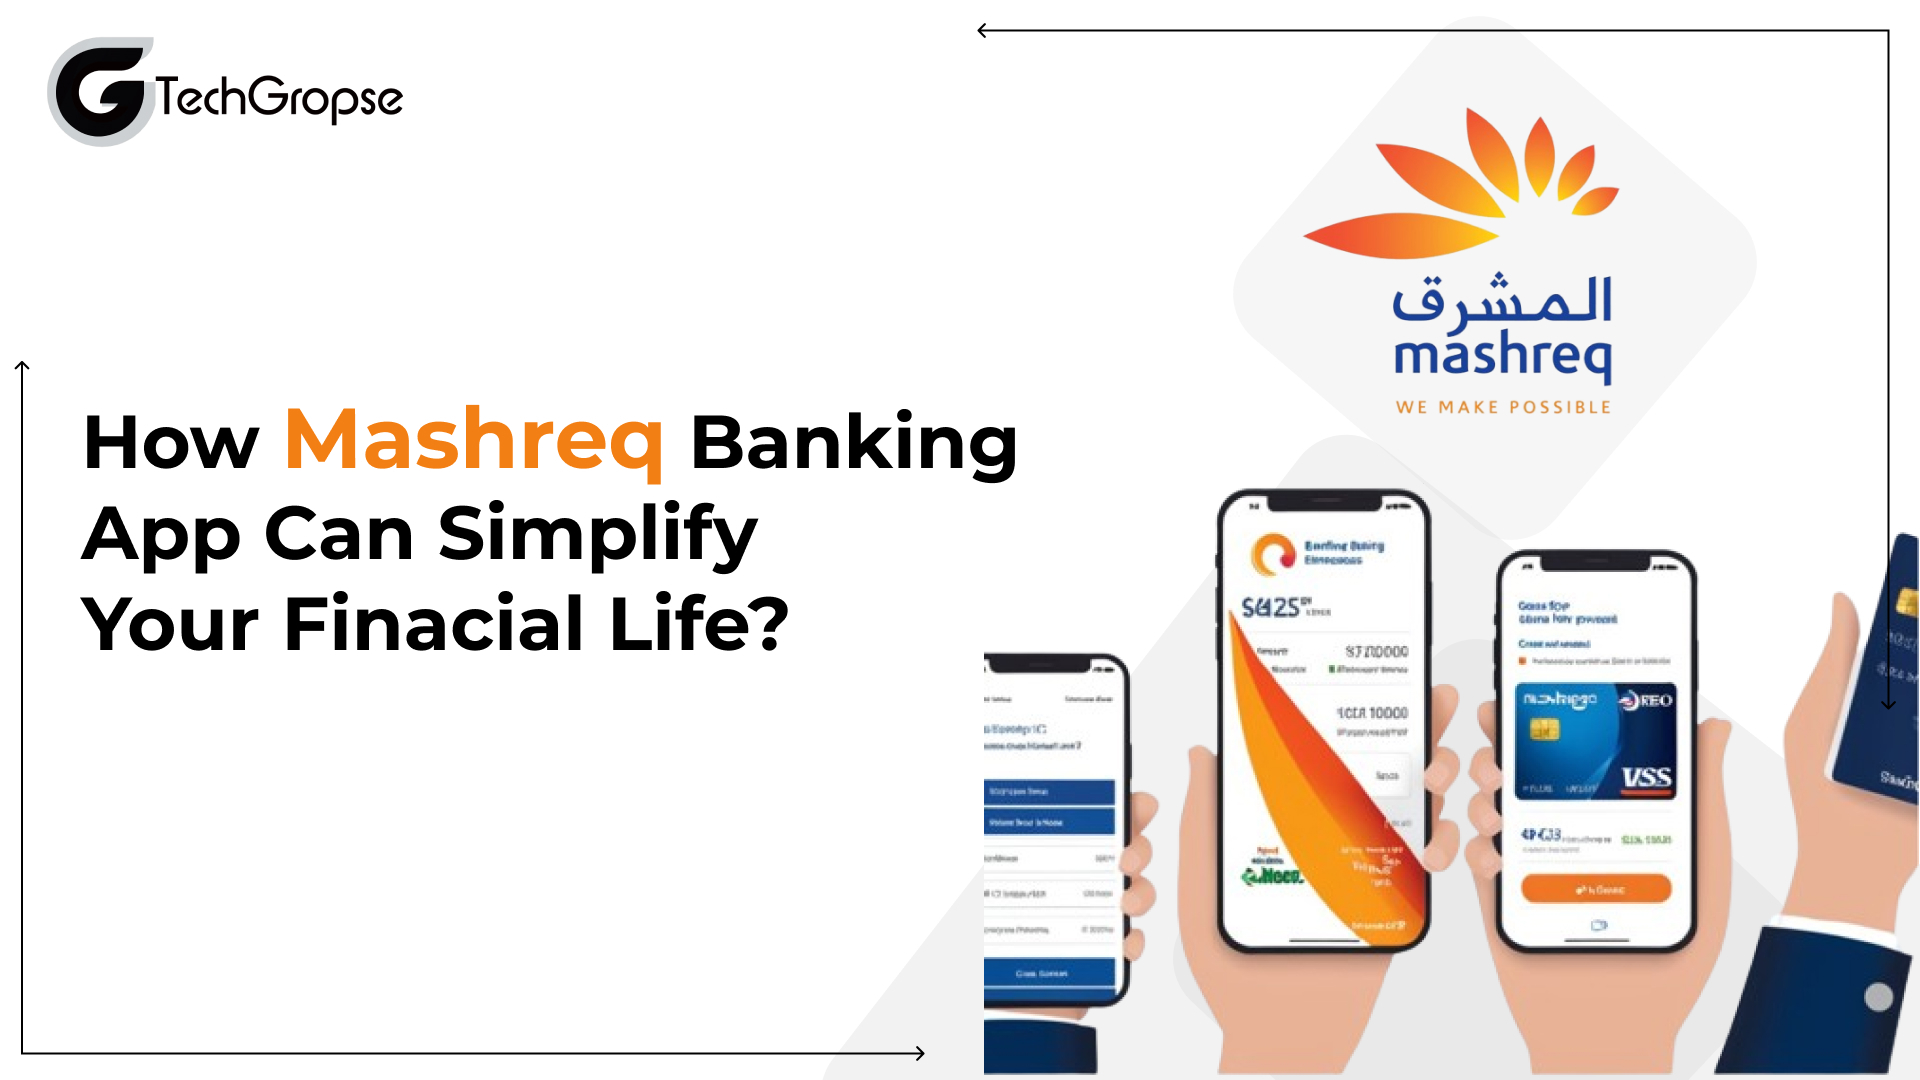 How Mashreq Banking App Can Simplify Your Financial Life?